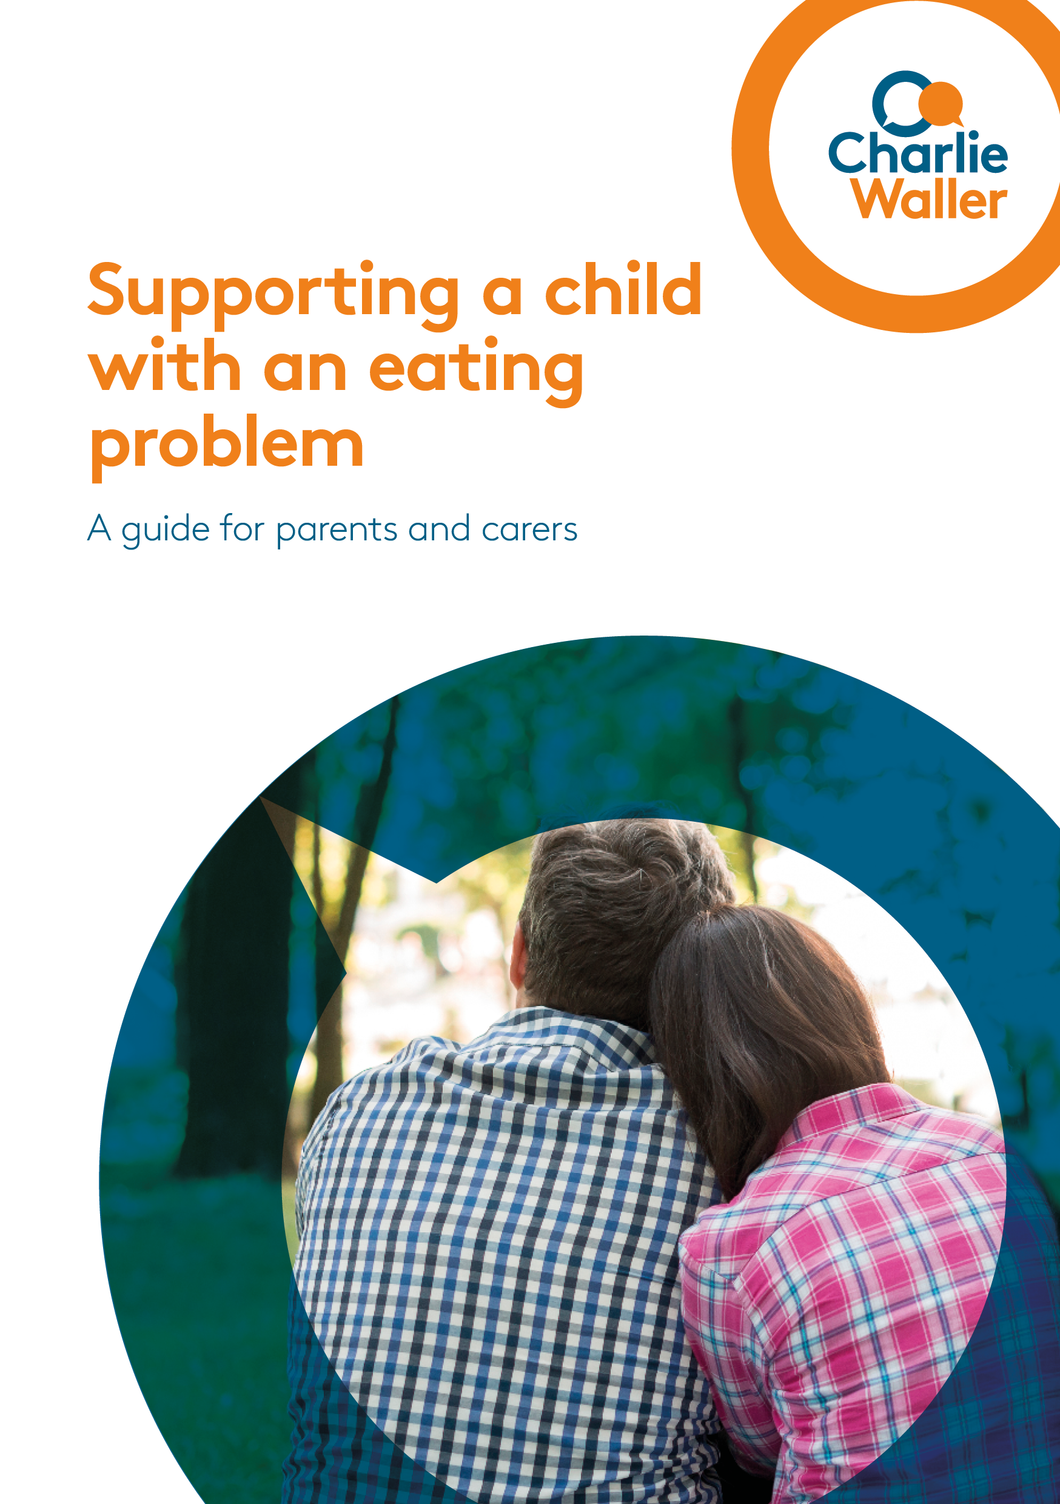 Supporting a child with an eating problem